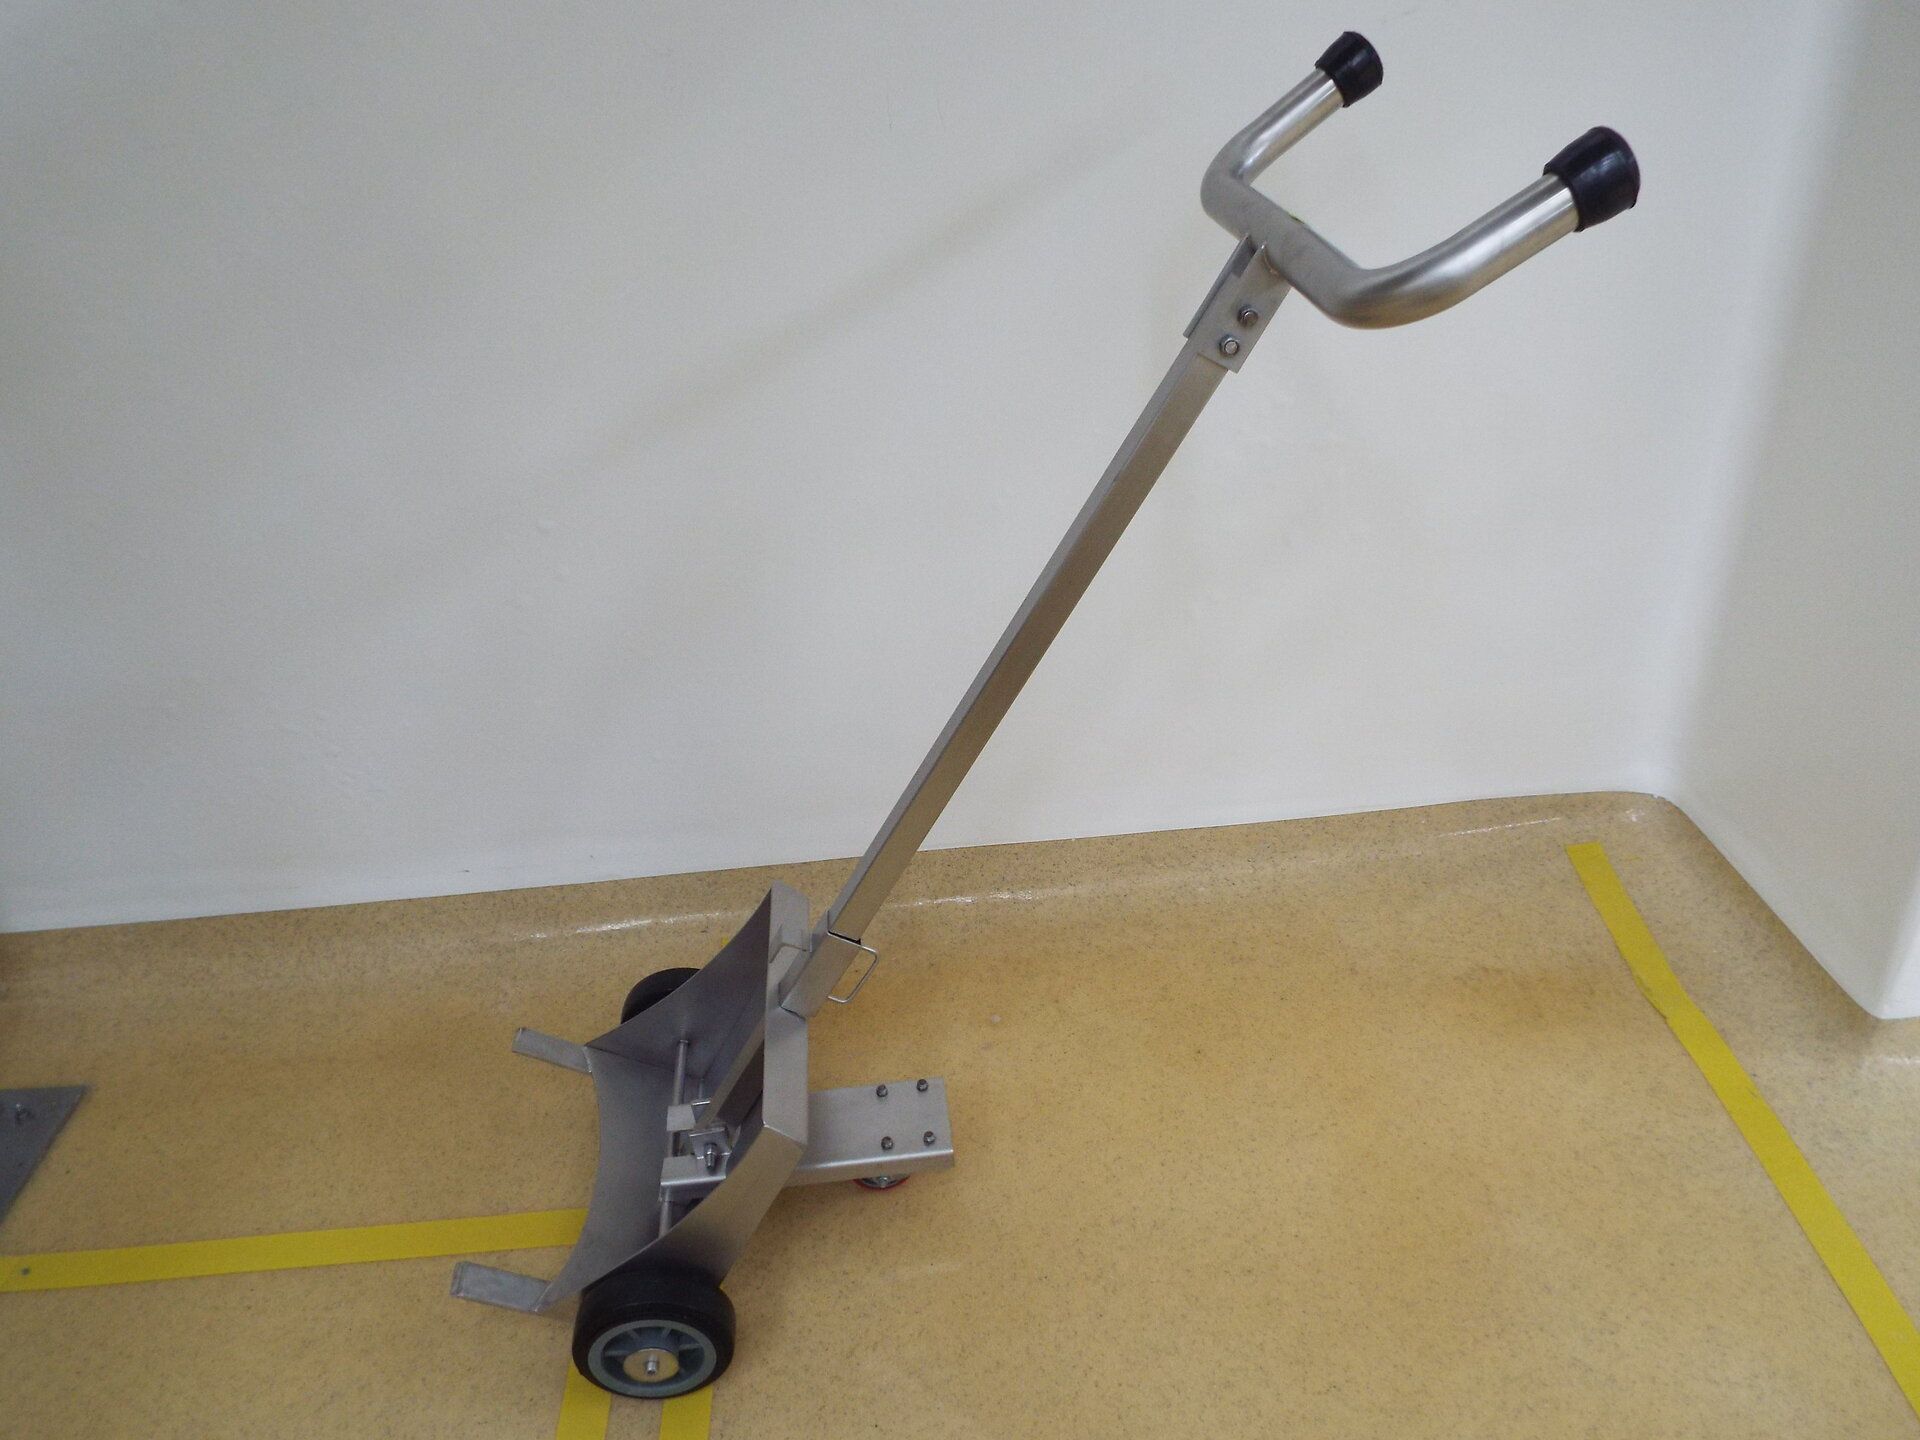 Stainless steel hand truck, with 3 wheels